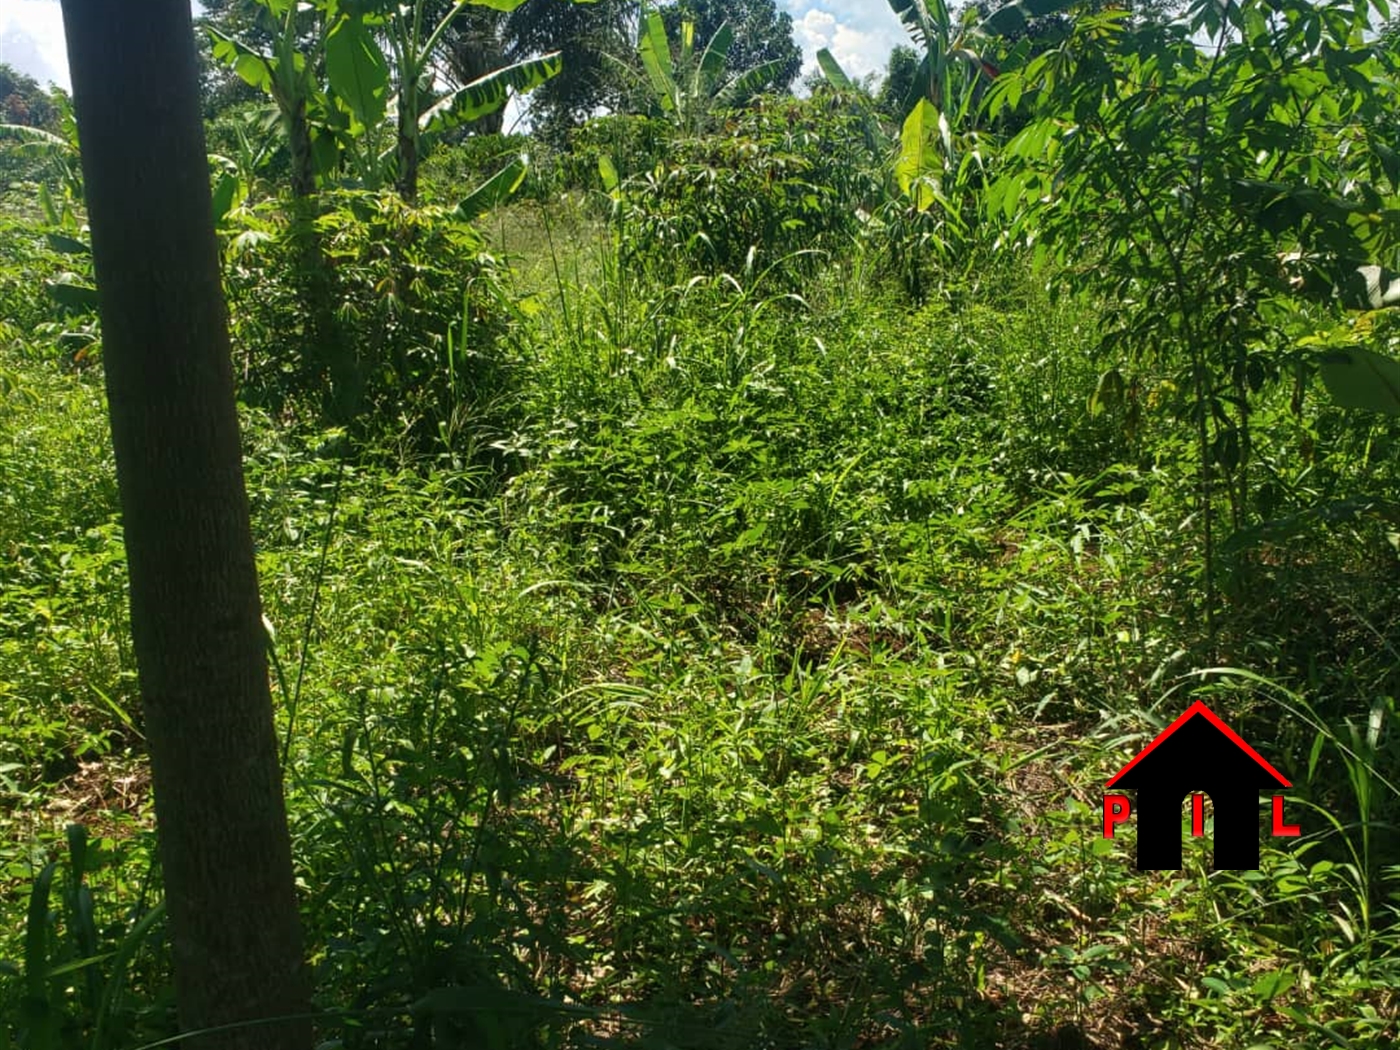 Agricultural Land for sale in Wakataayi Luweero